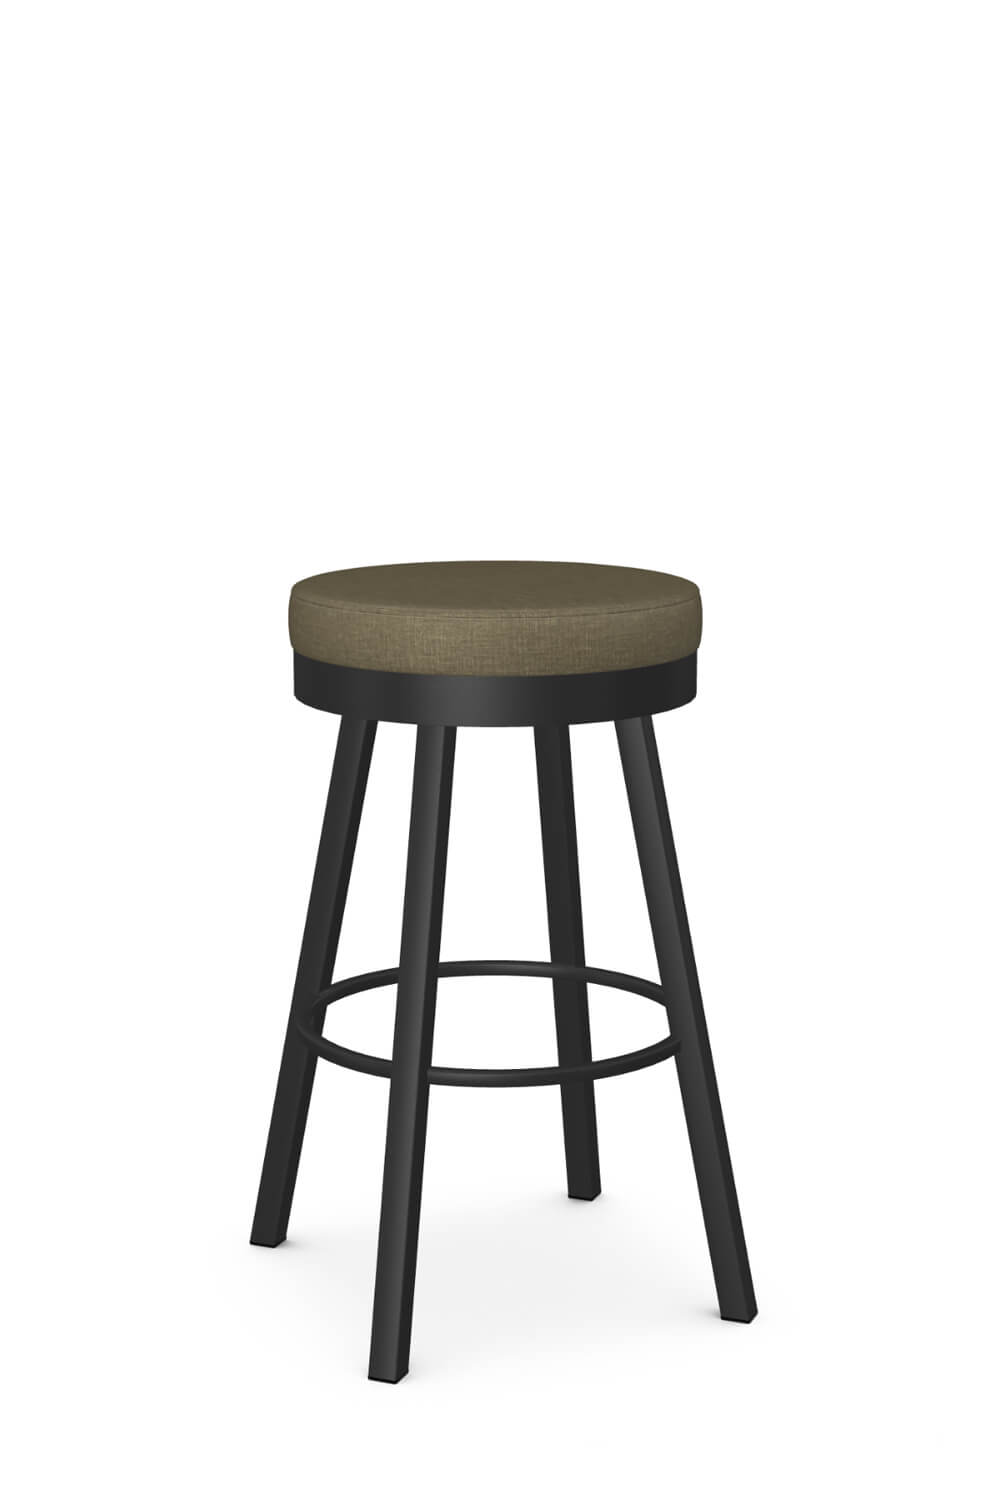 Amisco's Rudy Backless Black Swivel Bar Stool with Brown Seat Fabric